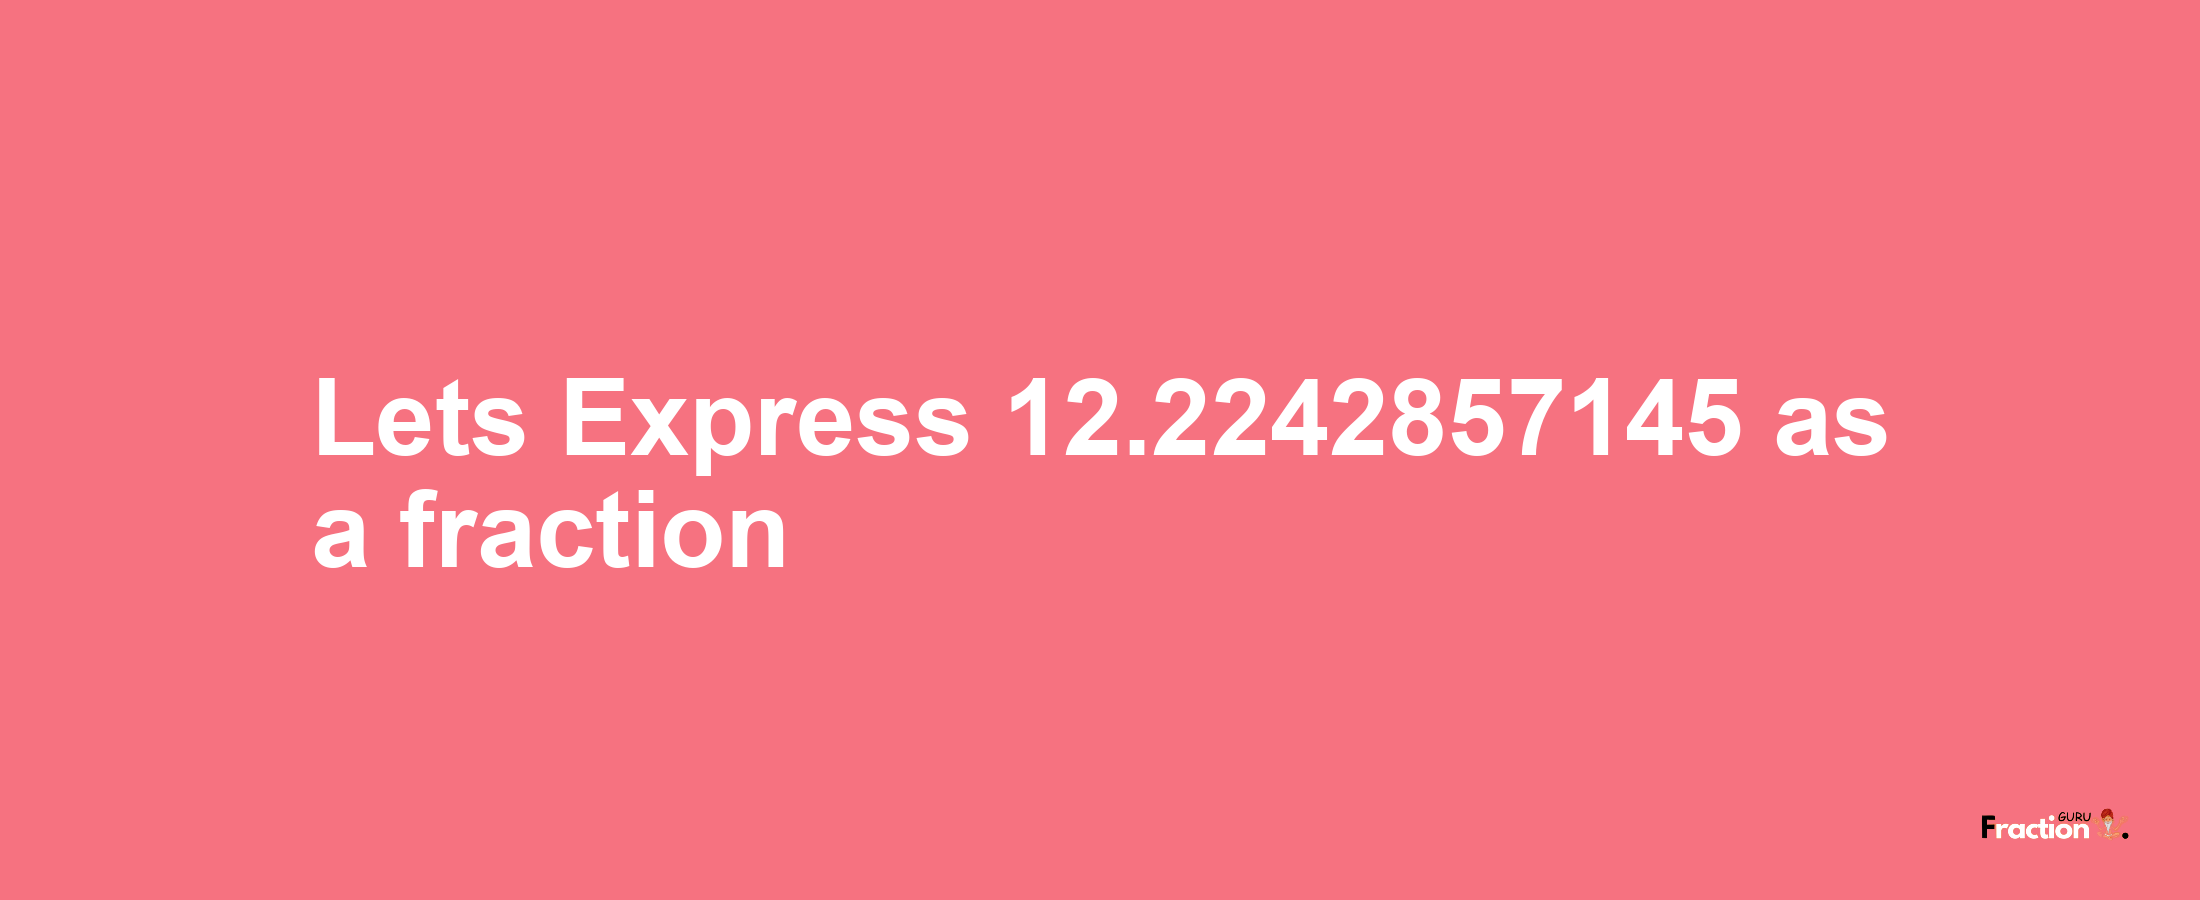 Lets Express 12.2242857145 as afraction